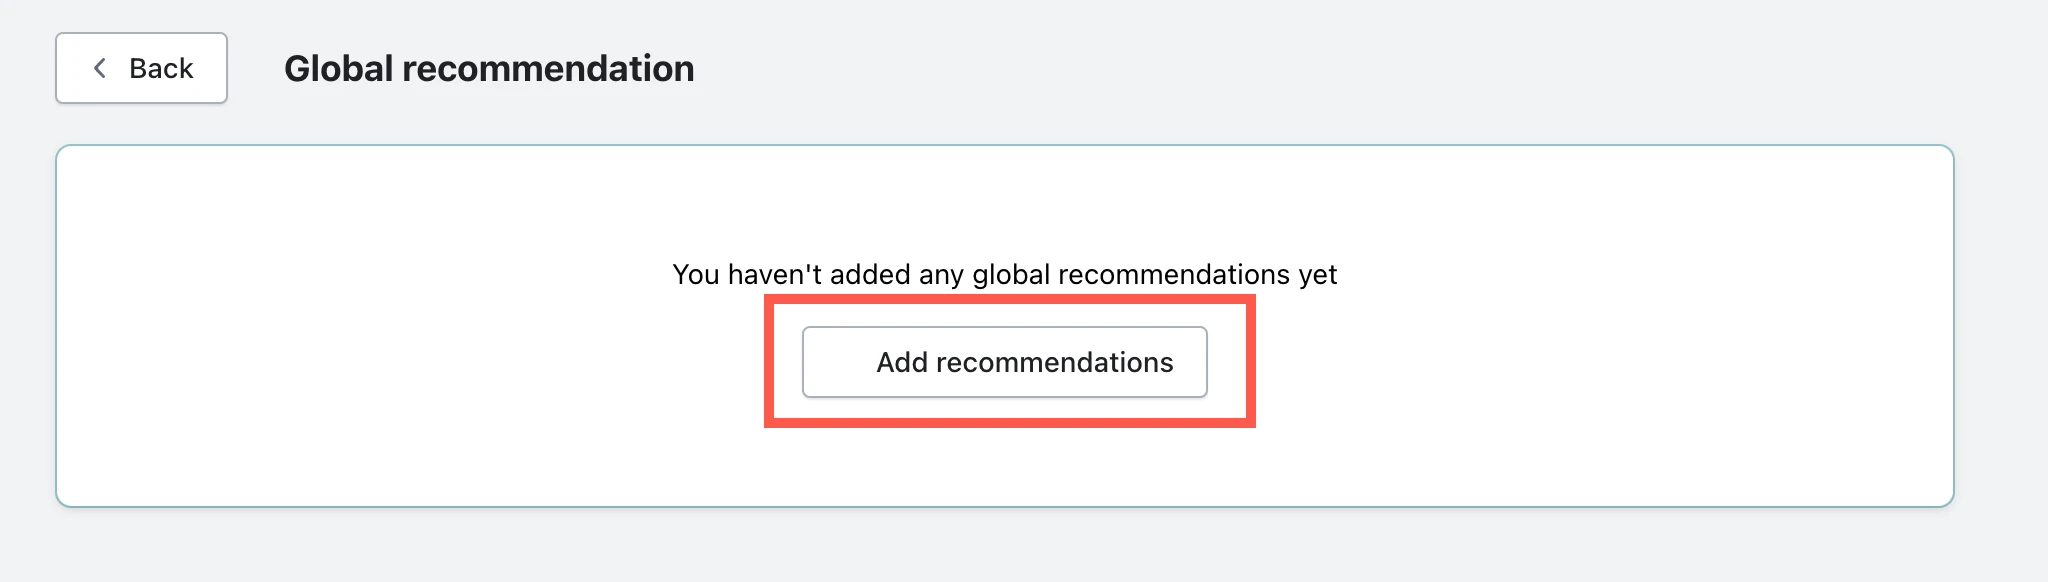 Automatic recommendation